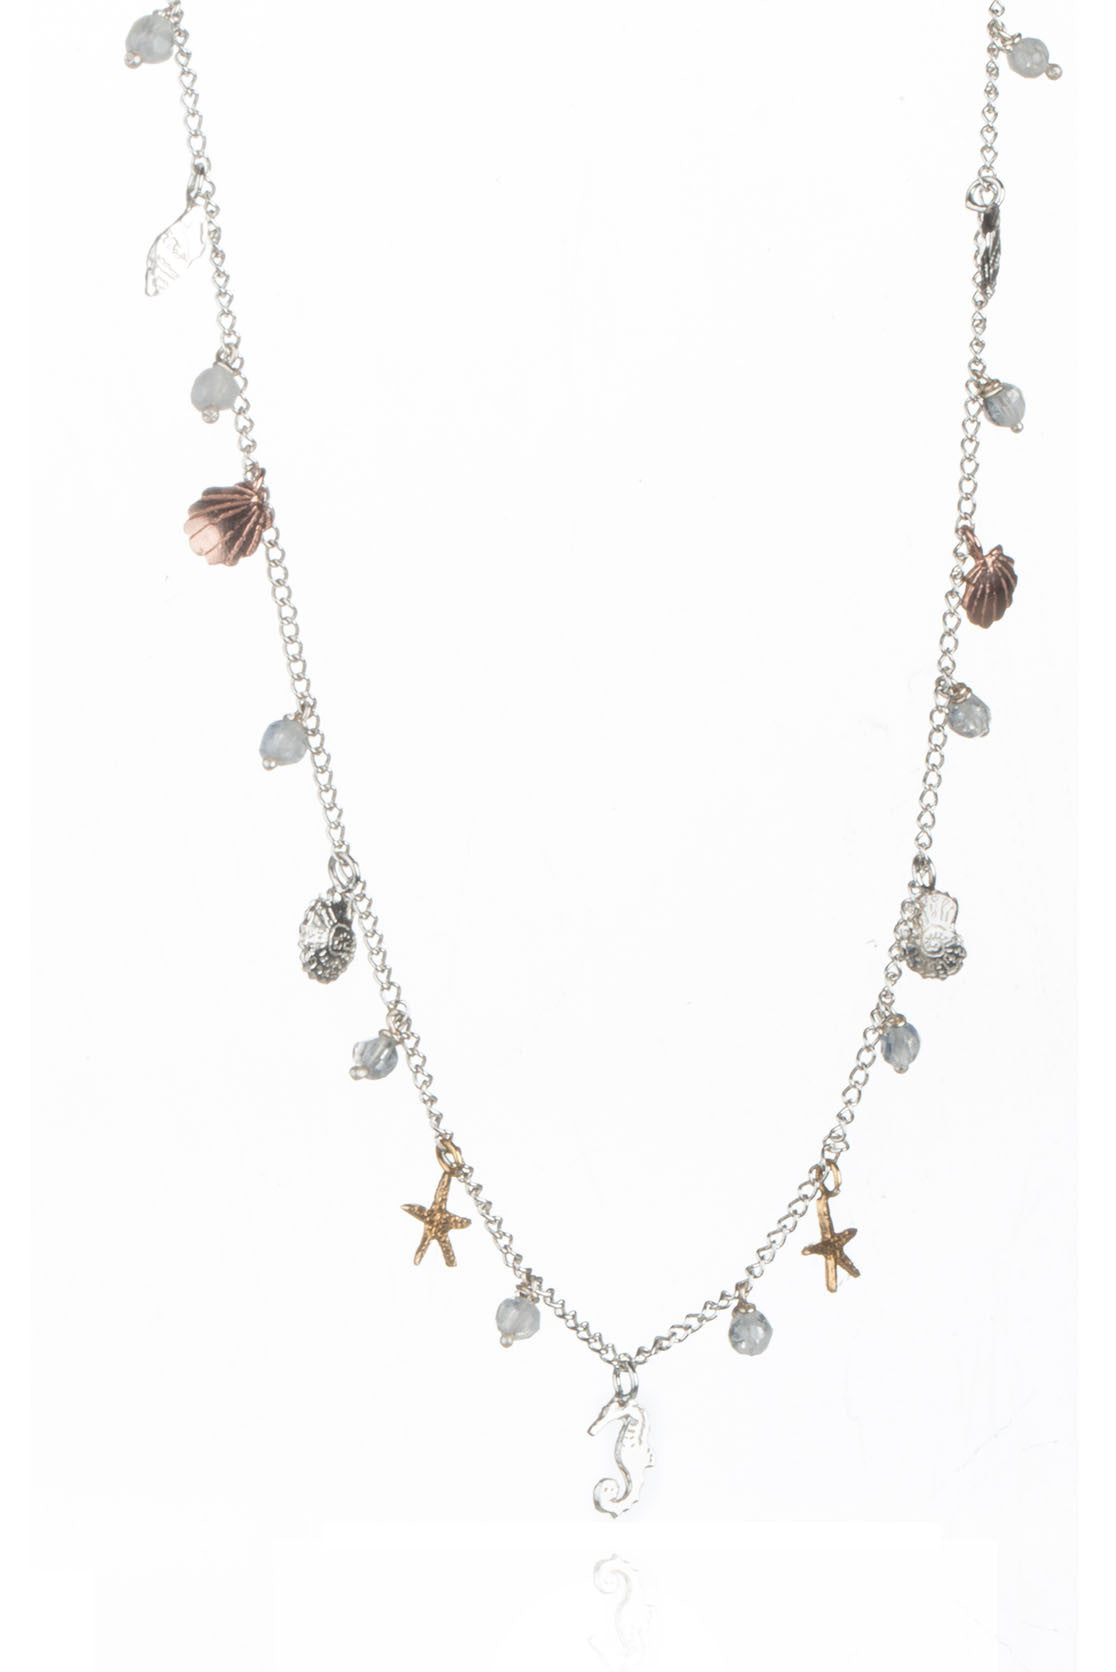 Silver with gold vermeil and rose gold vermeil details Seaside Jewellery Necklace 